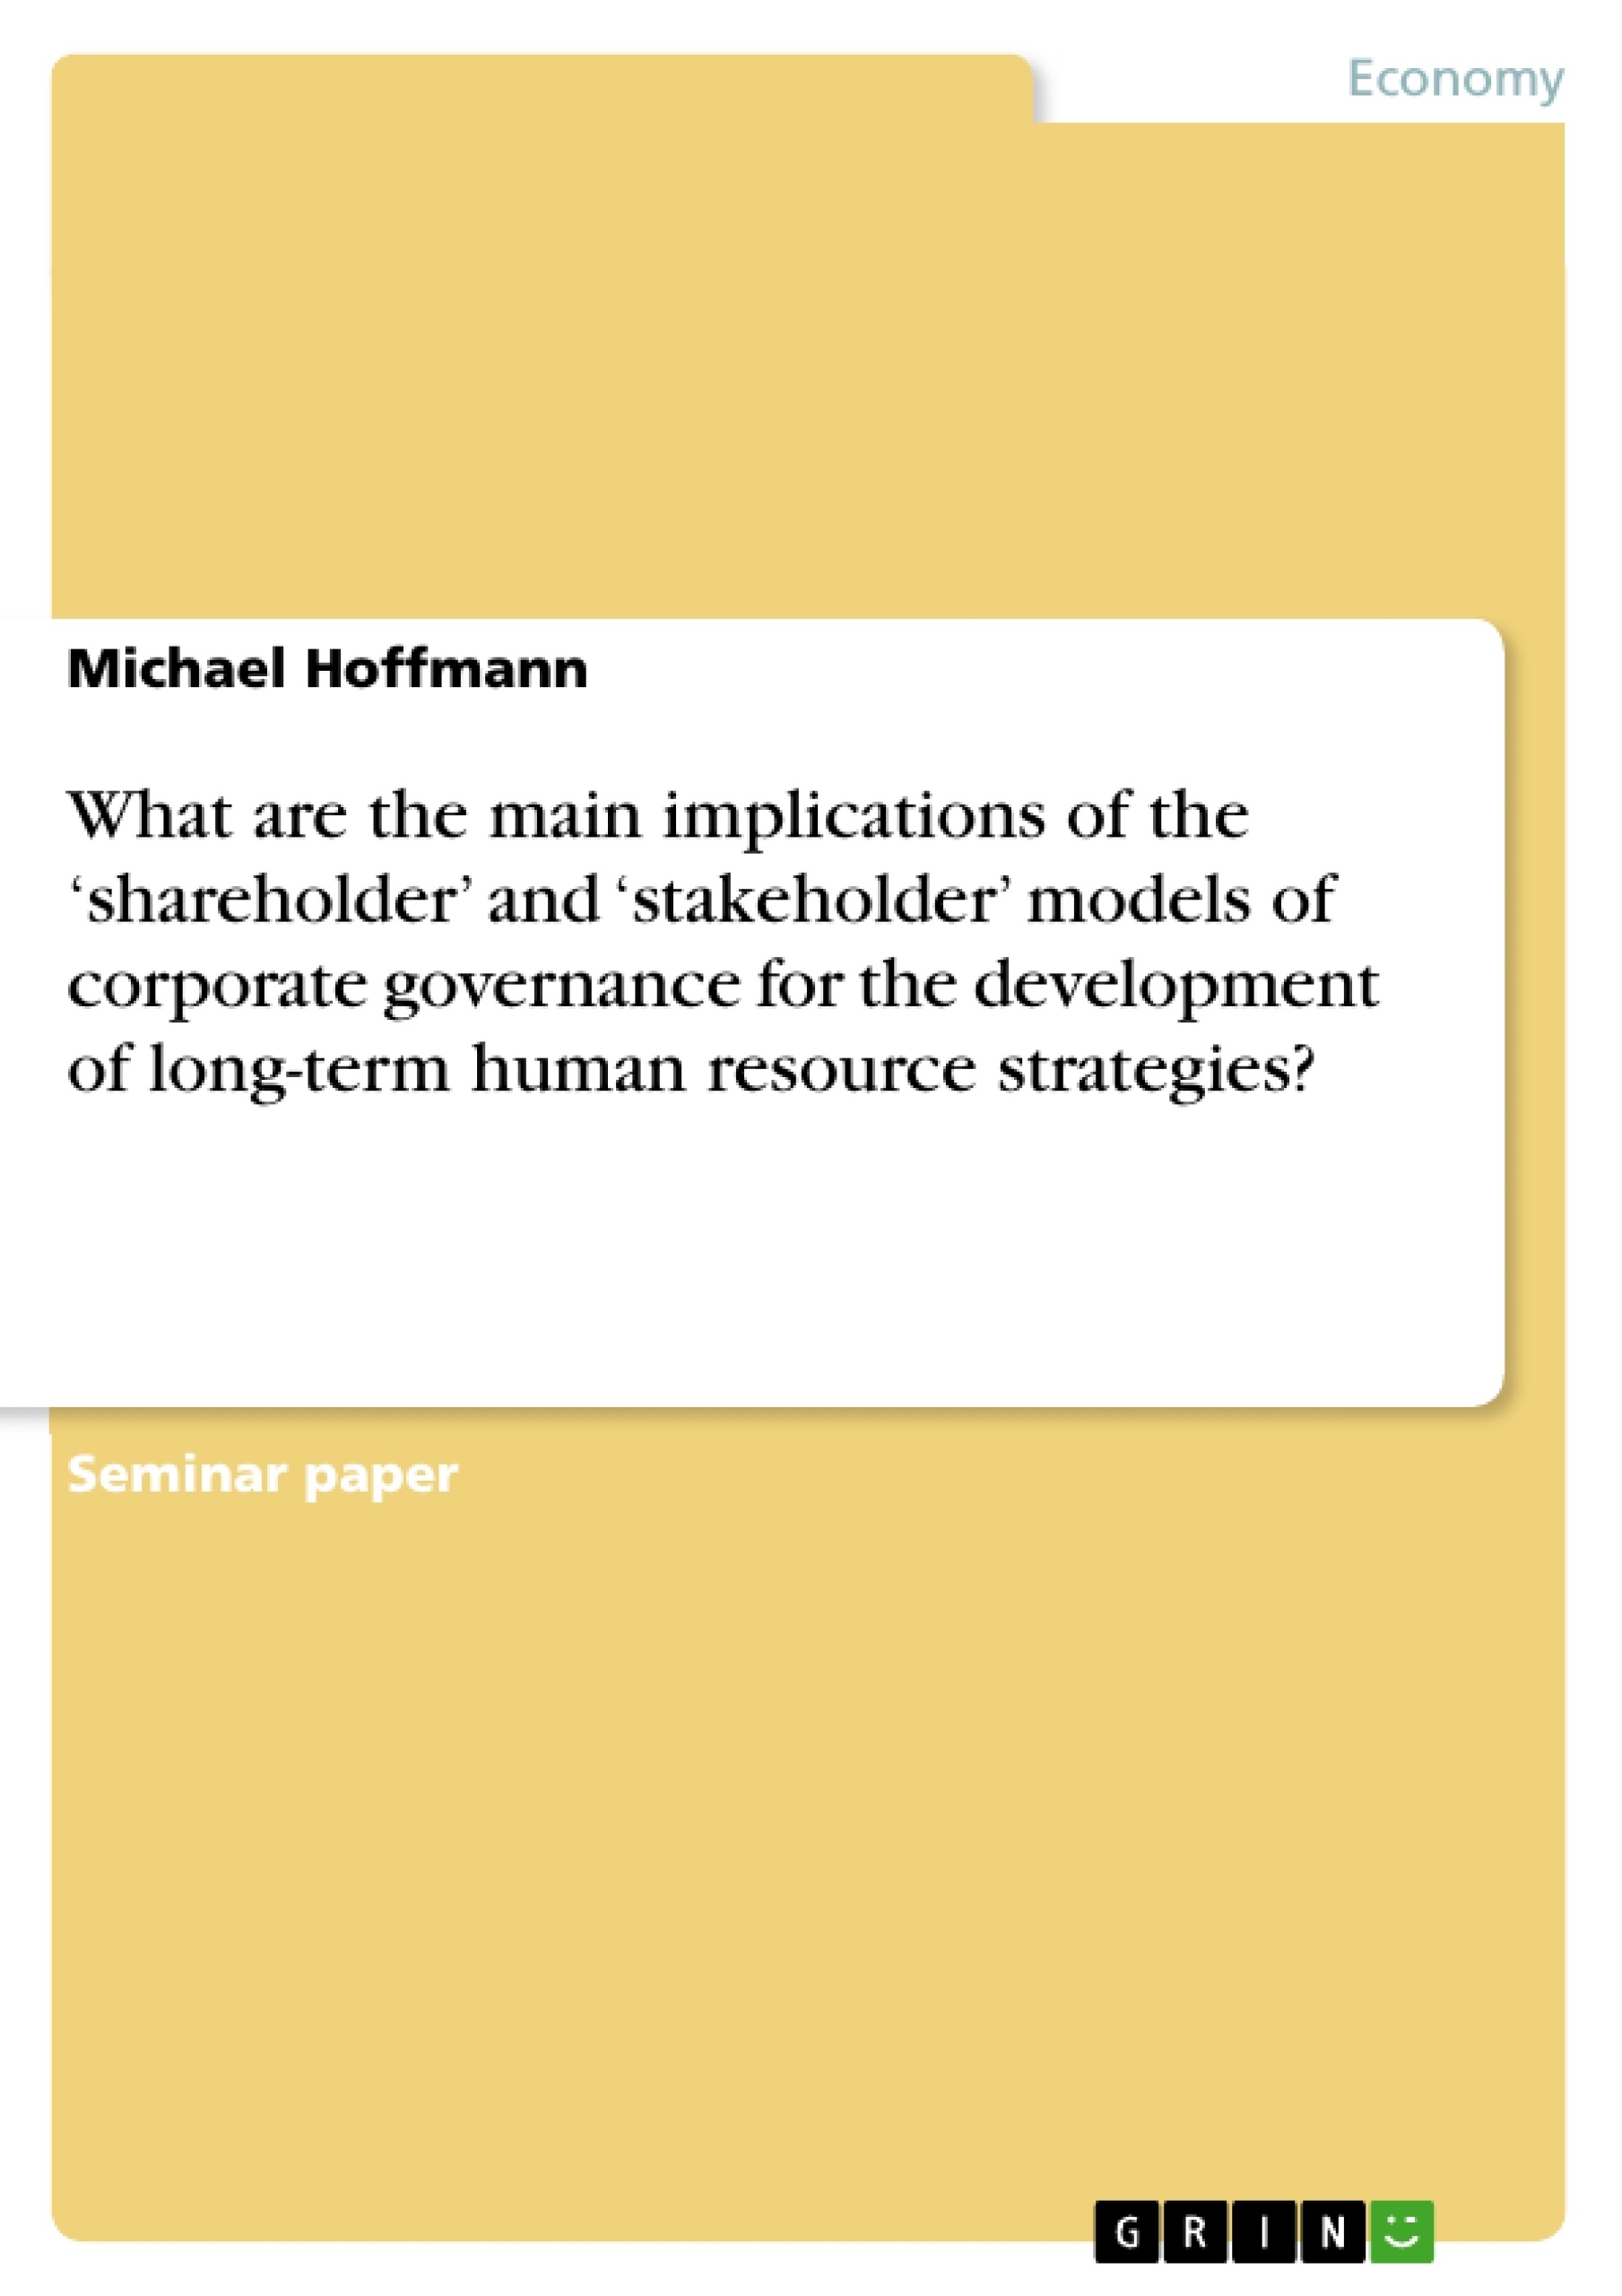 Título: What are the main implications of the ‘shareholder’ and ‘stakeholder’ models of corporate governance for the development of long-term human resource strategies?